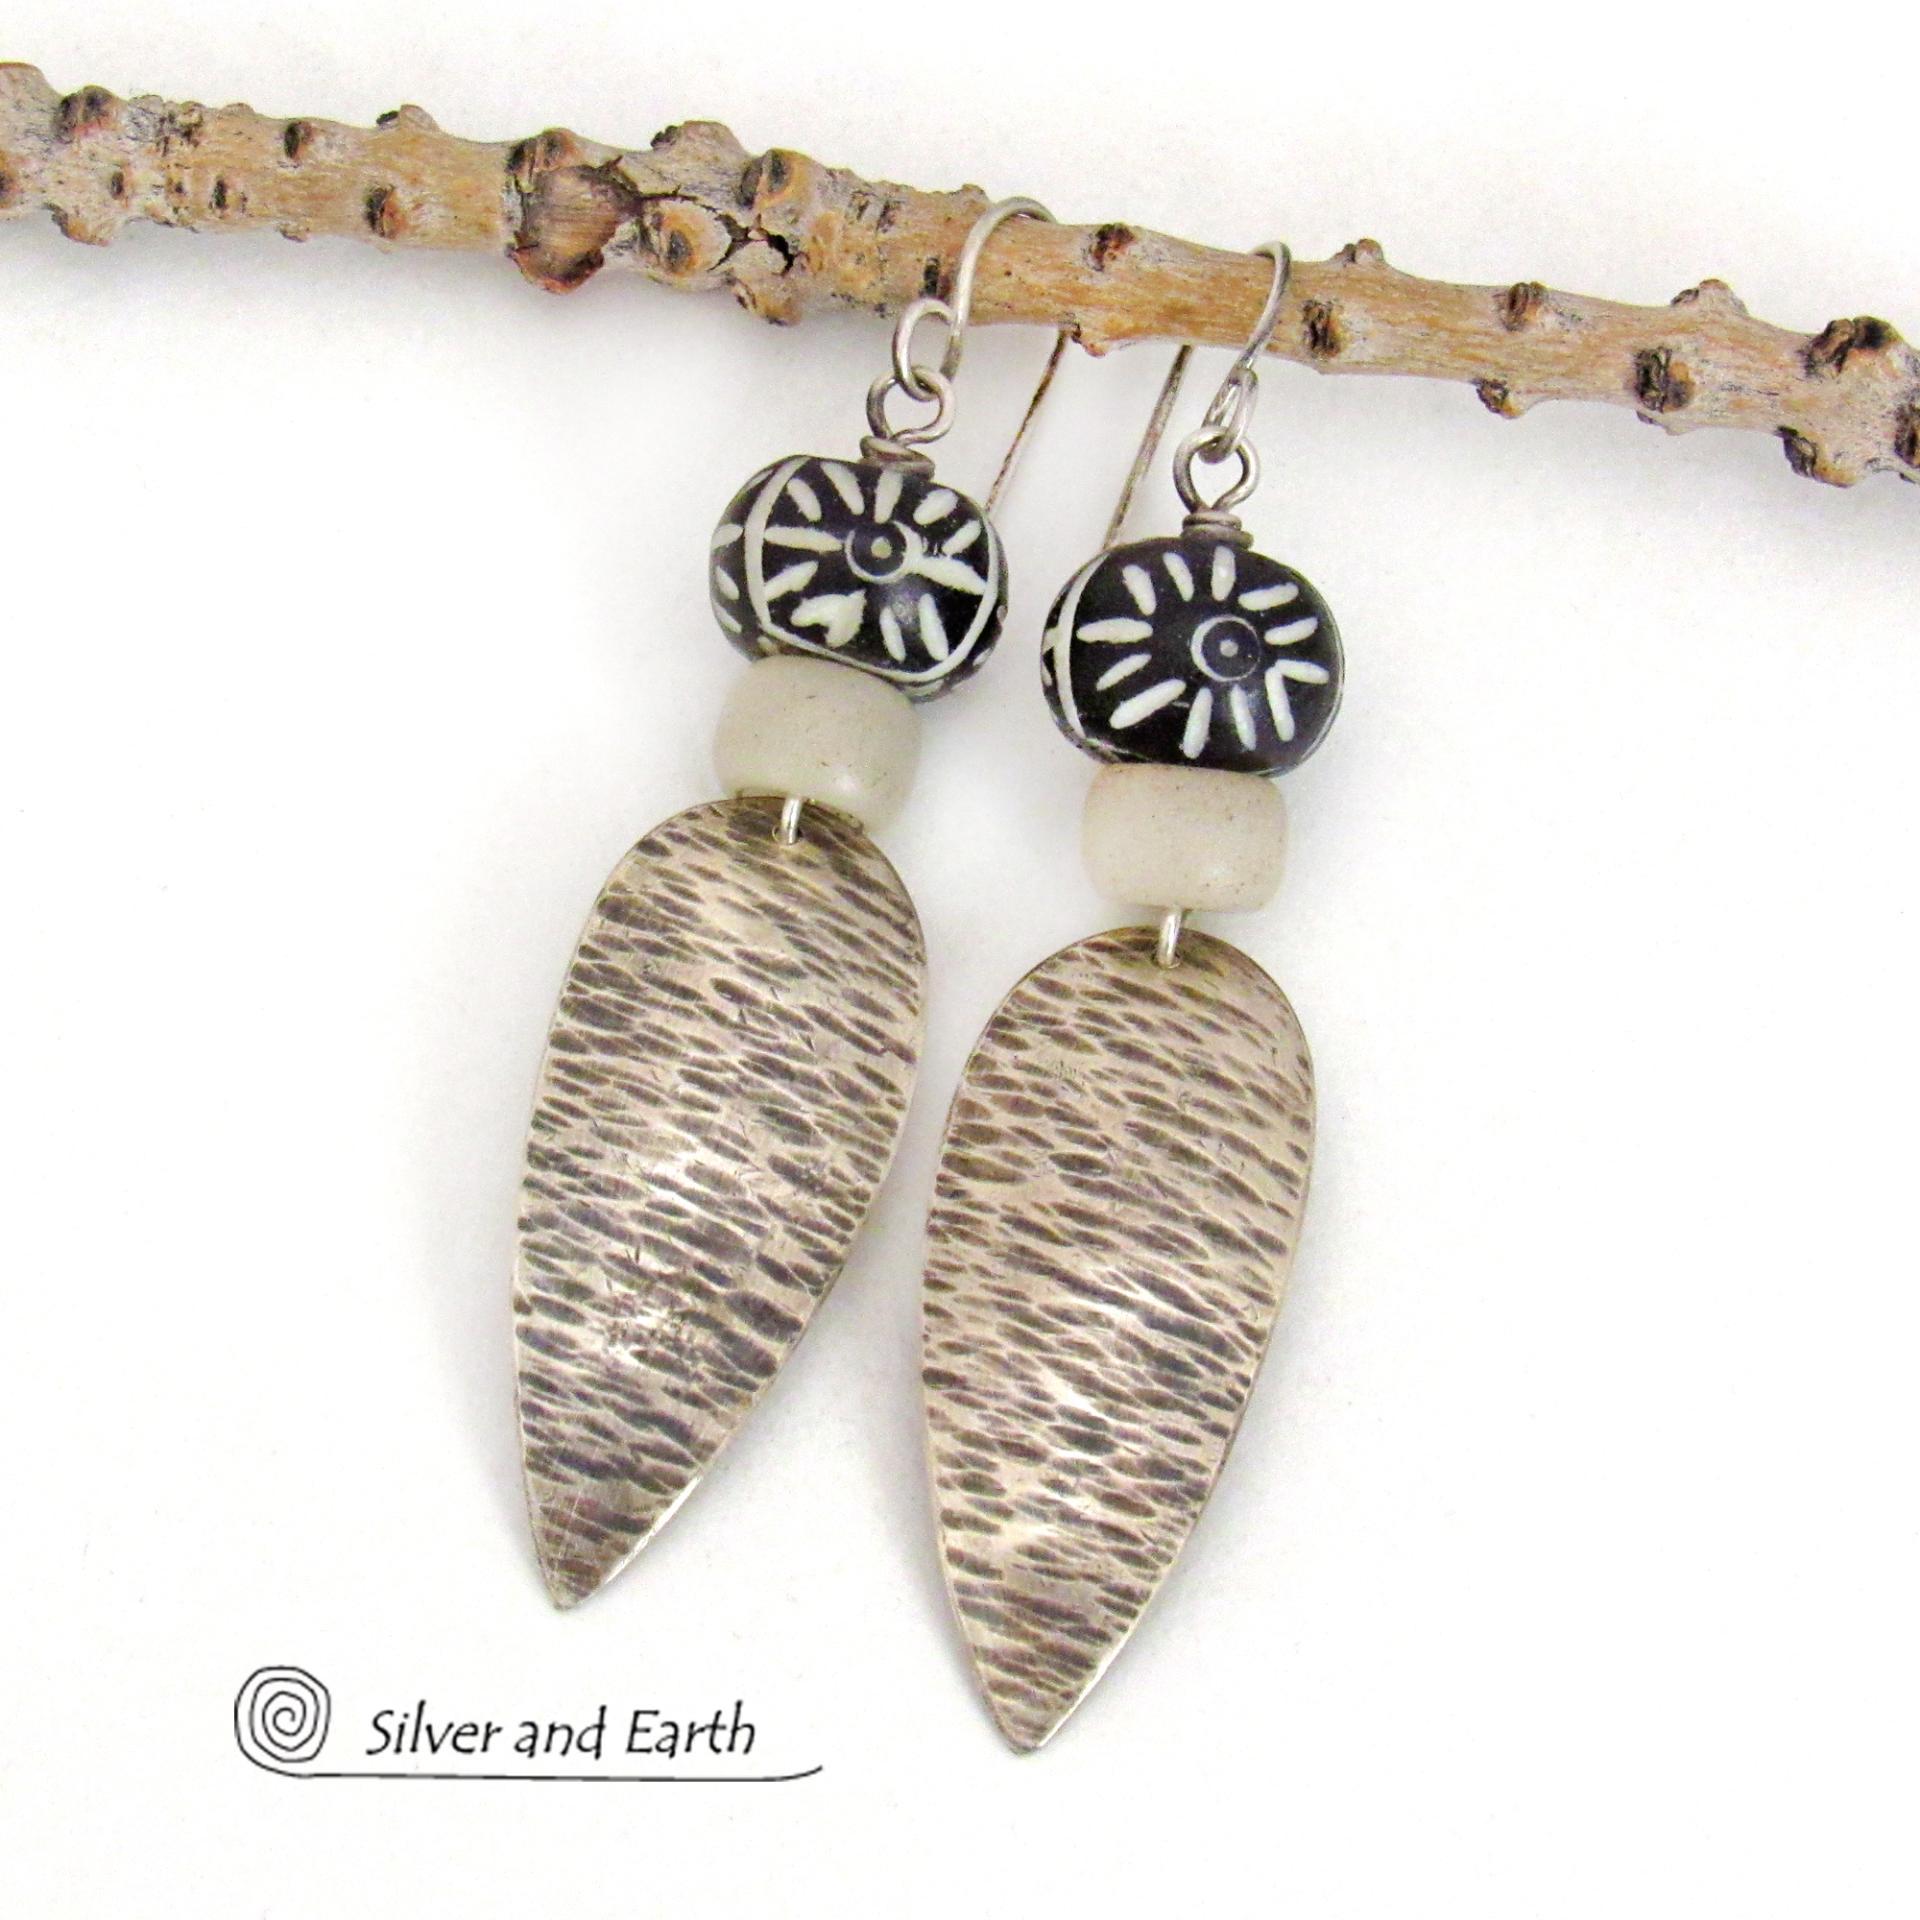 Sterling Silver Earrings with African Carved Black Bone and Glass Beads - Bold Ethnic Tribal Style Jewelry